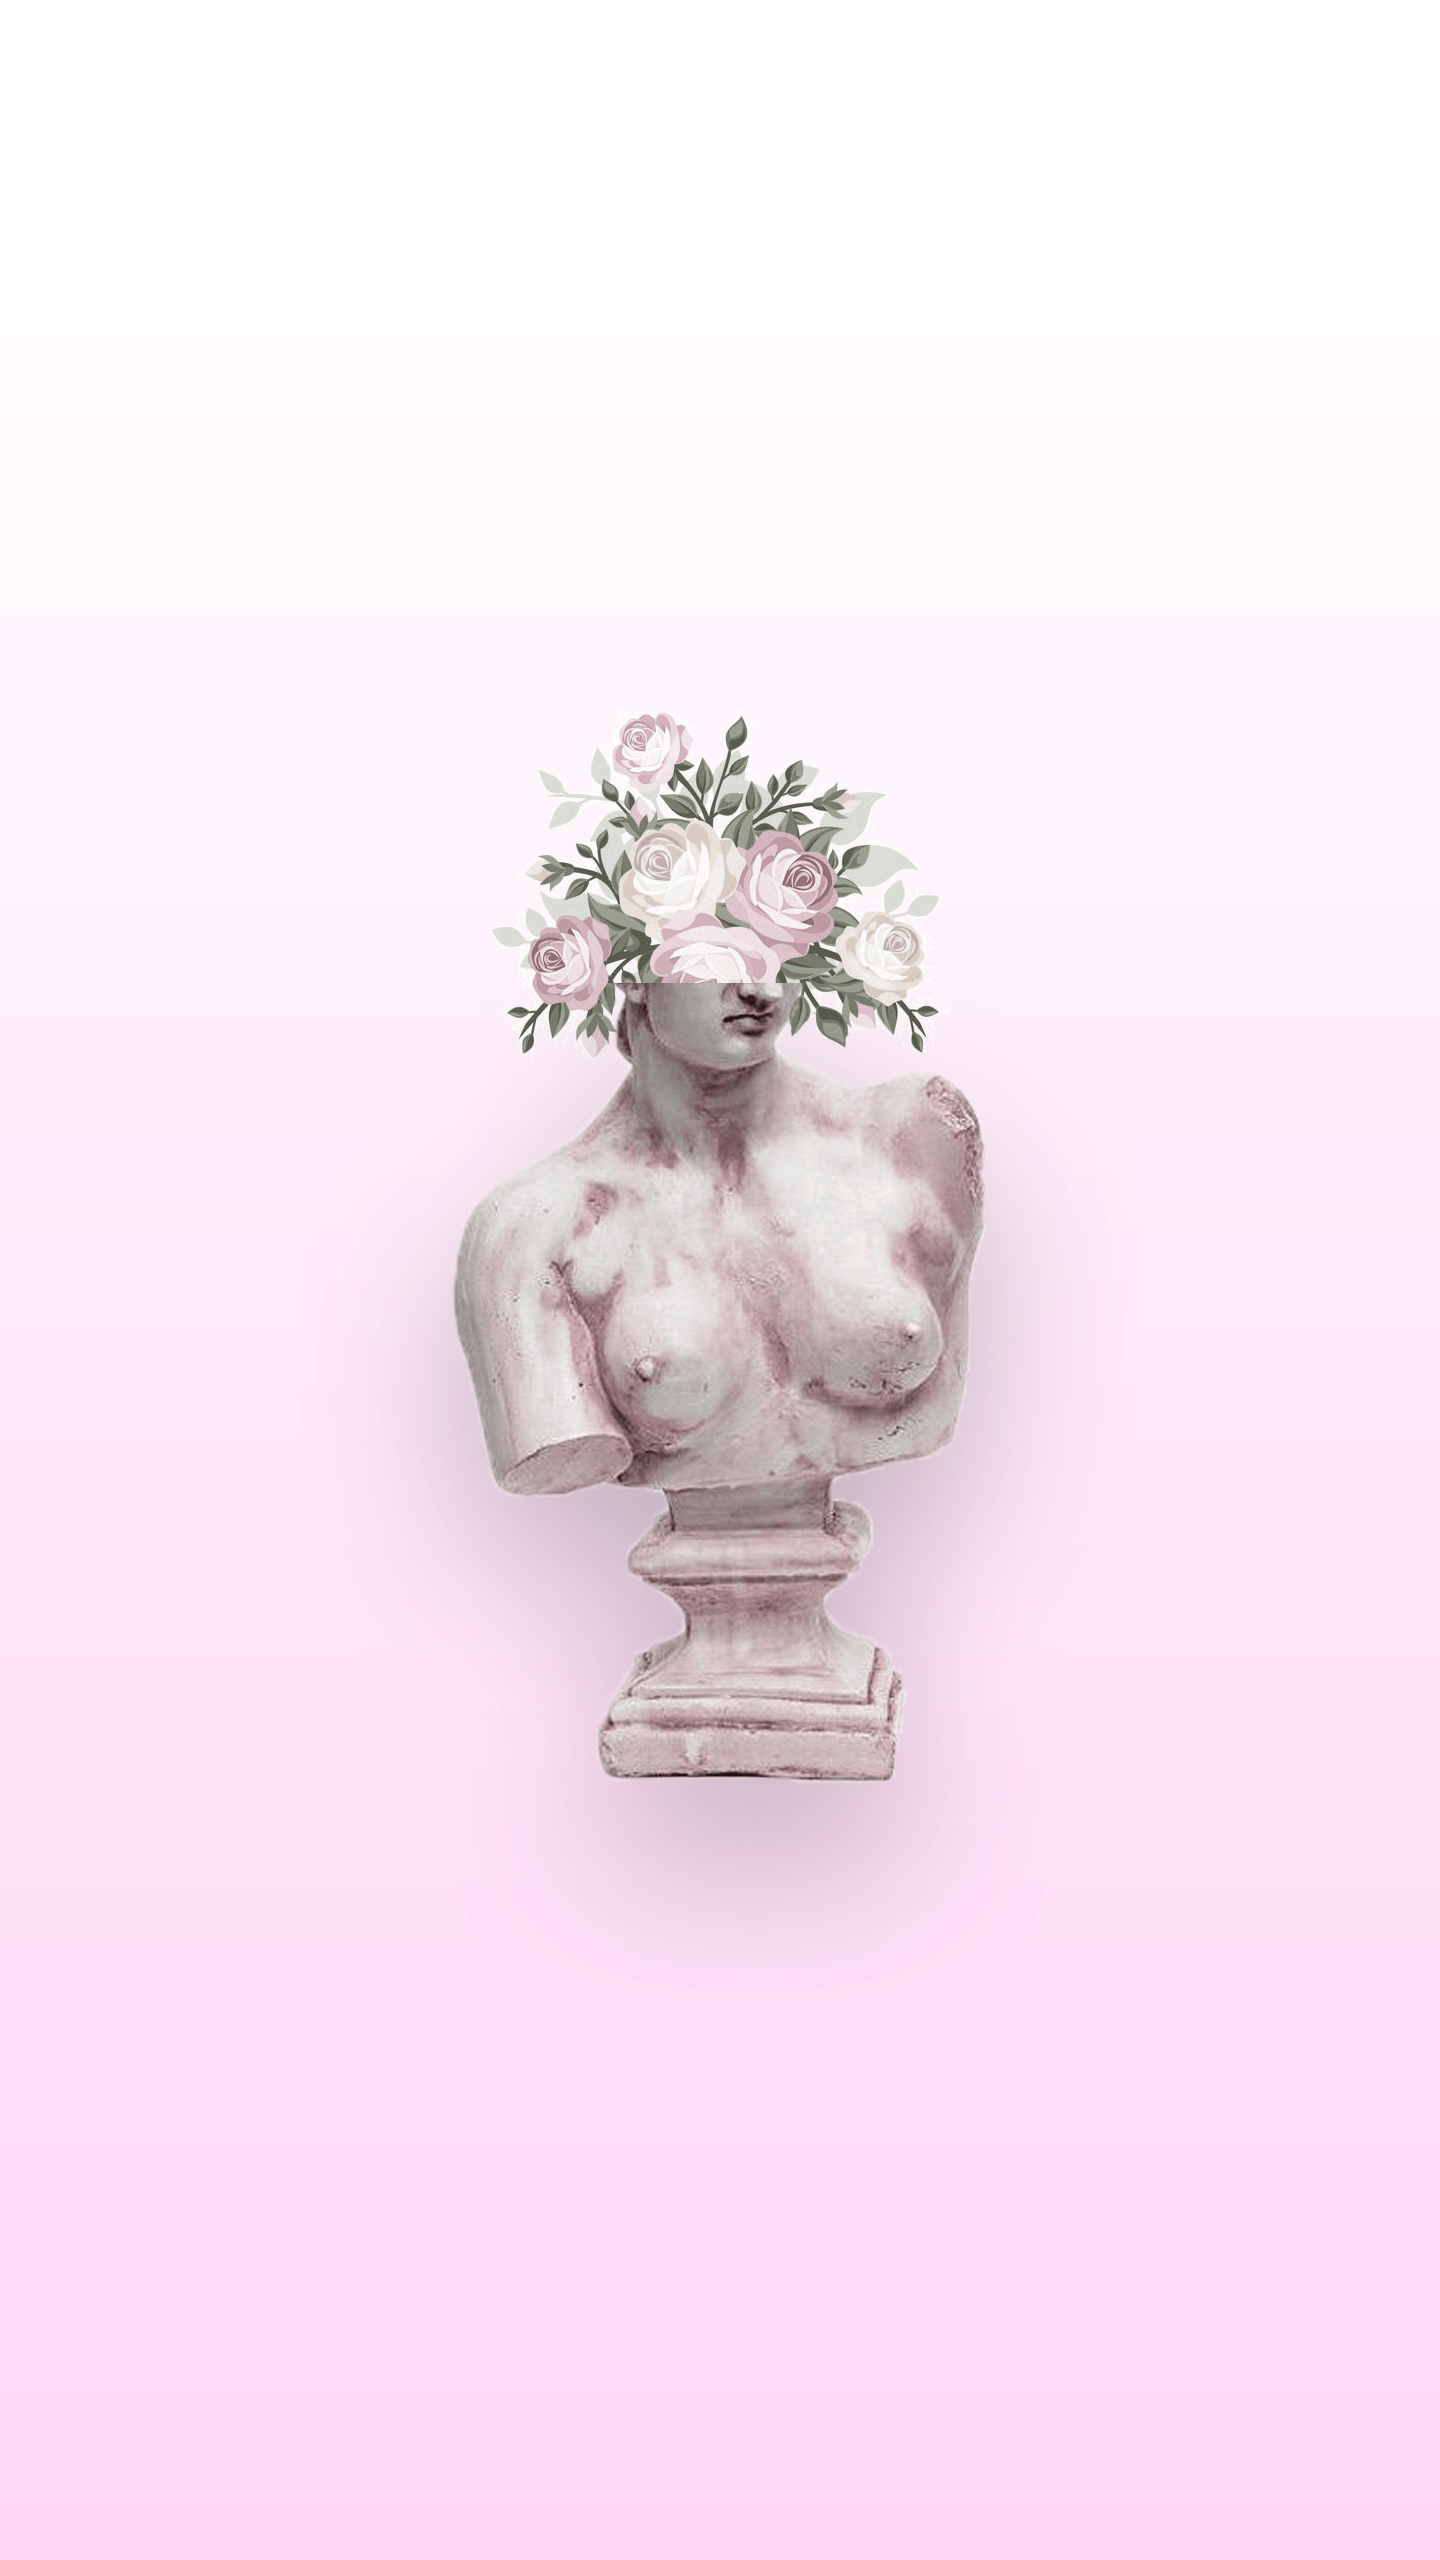 A statue with flowers on its head - Greek statue